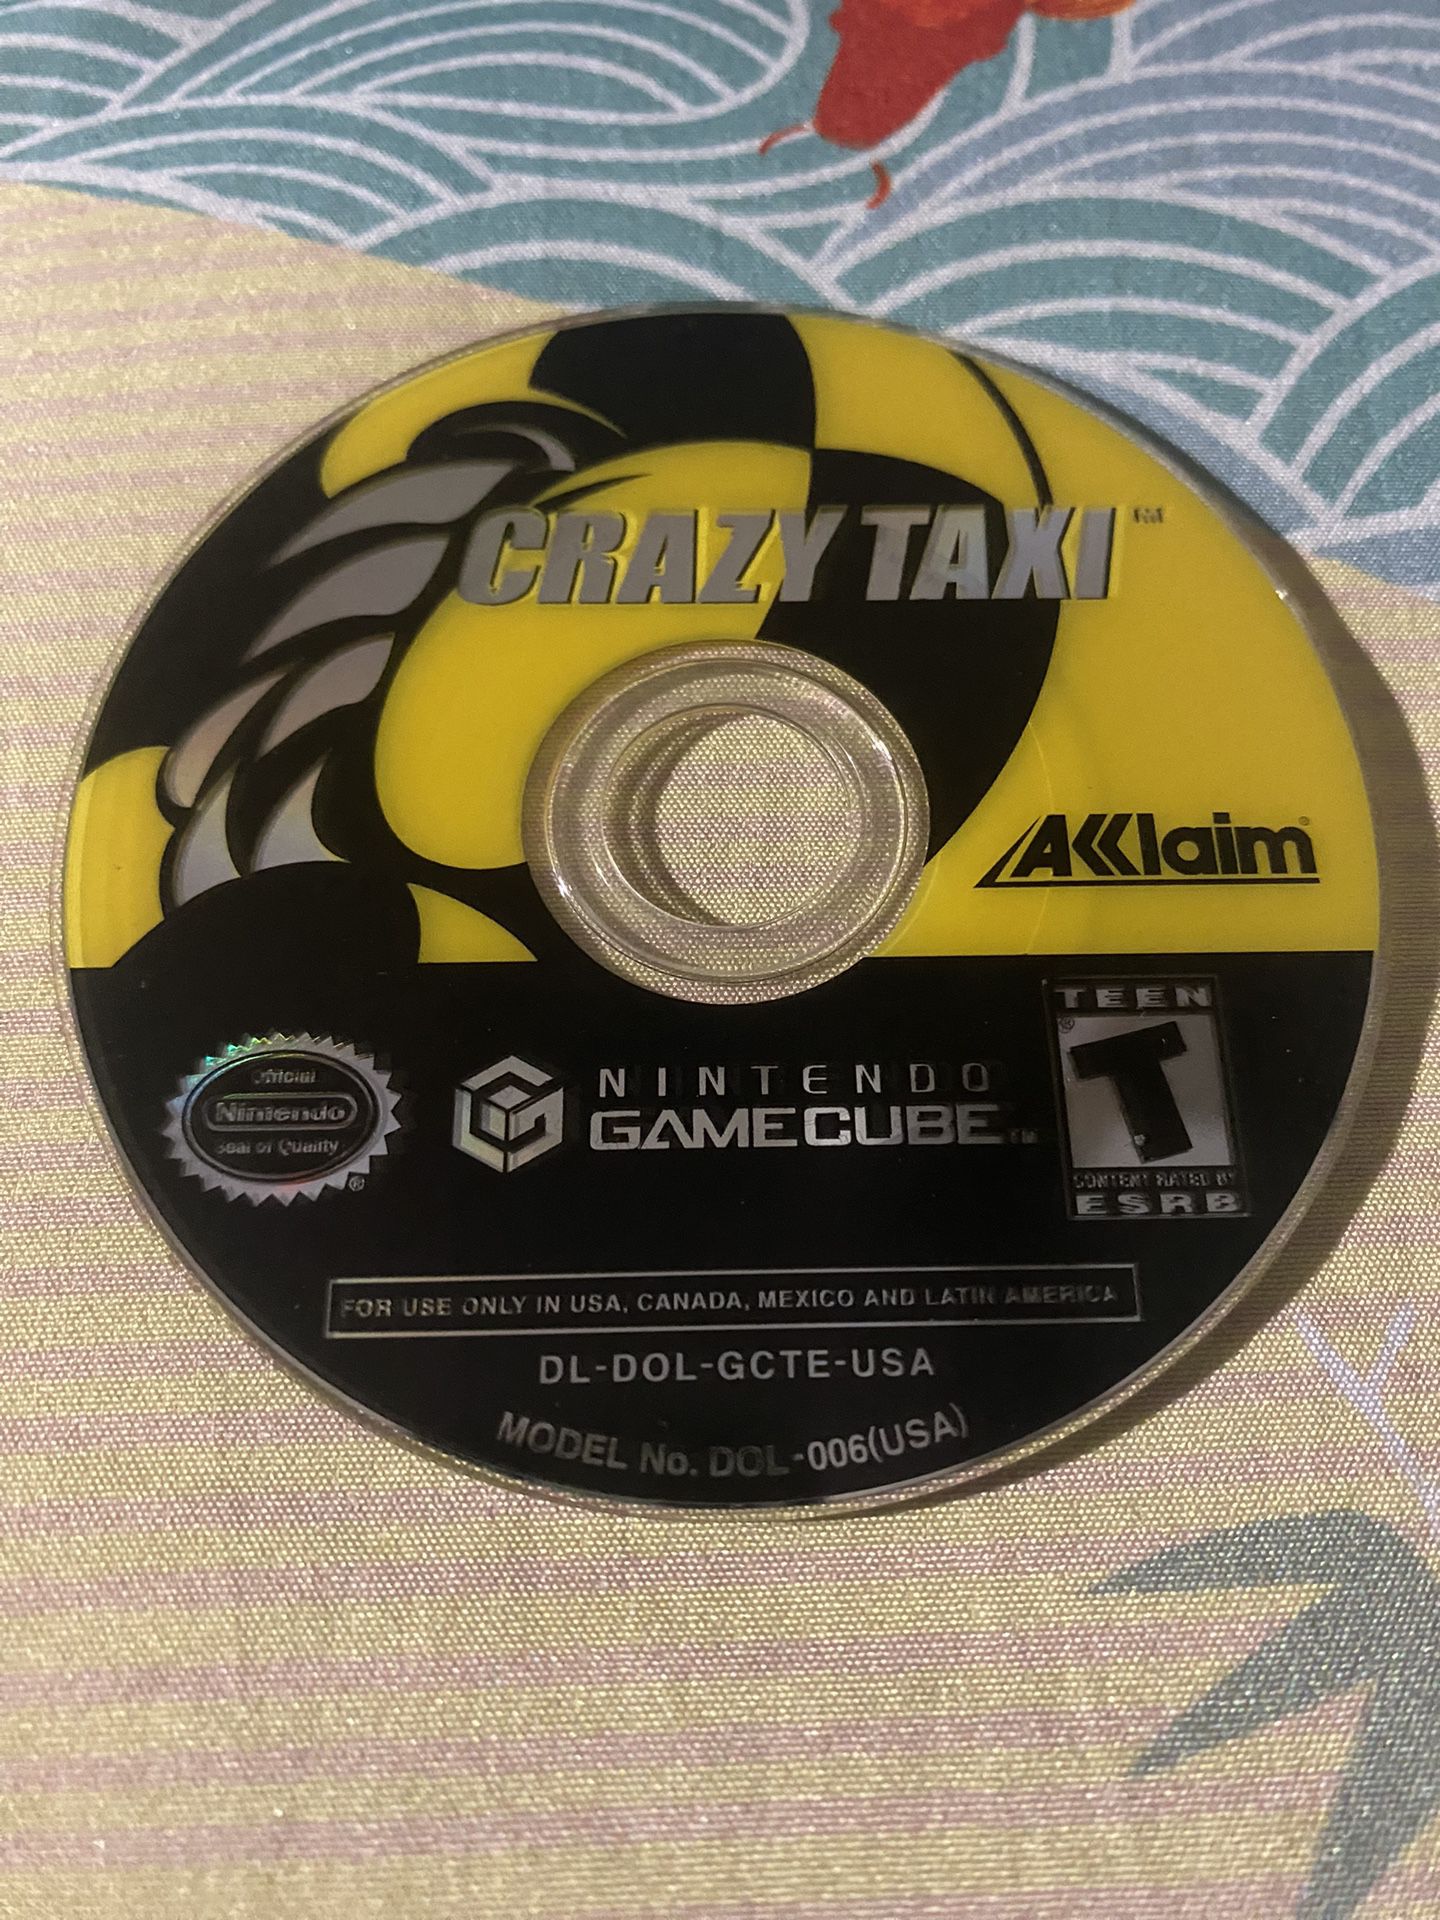 Crazy Taxi for GameCube